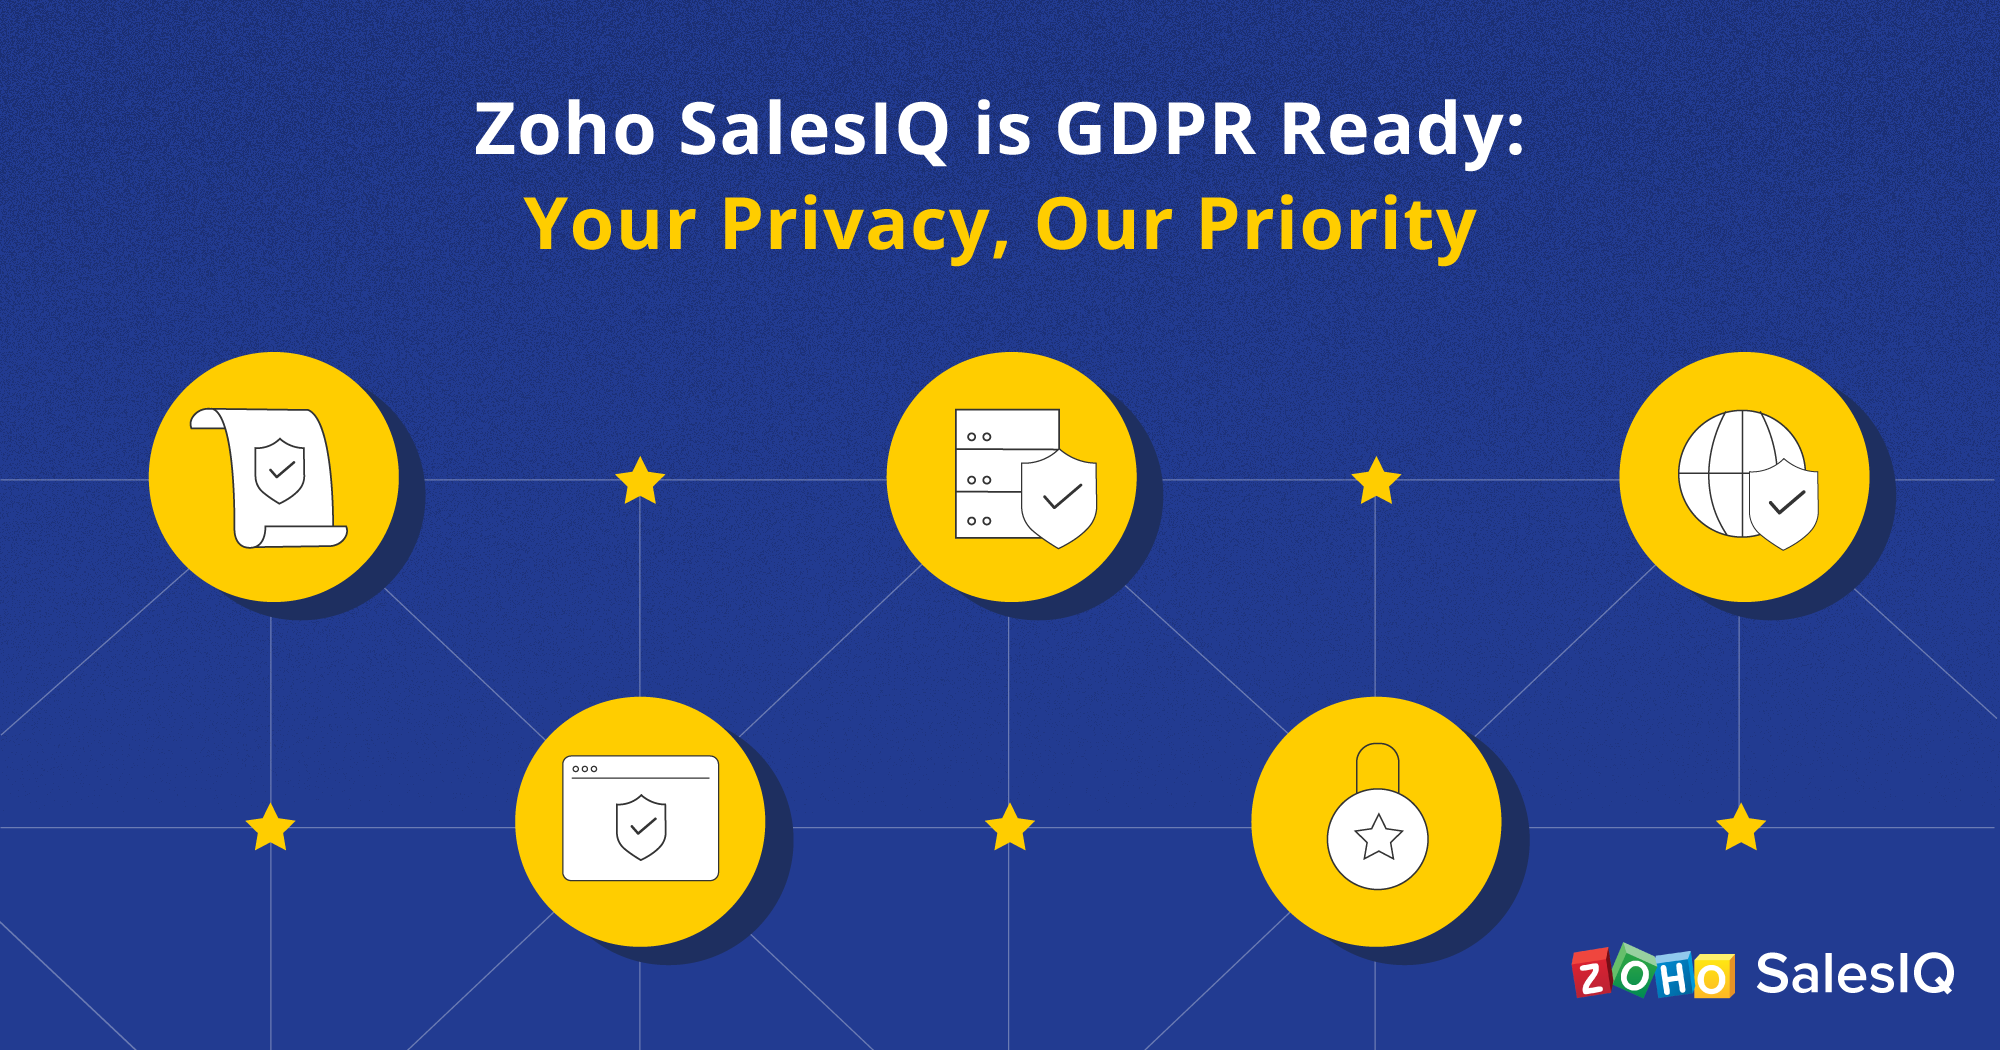 Zoho SalesIQ is GDPR Ready: Your Privacy, Our Priority